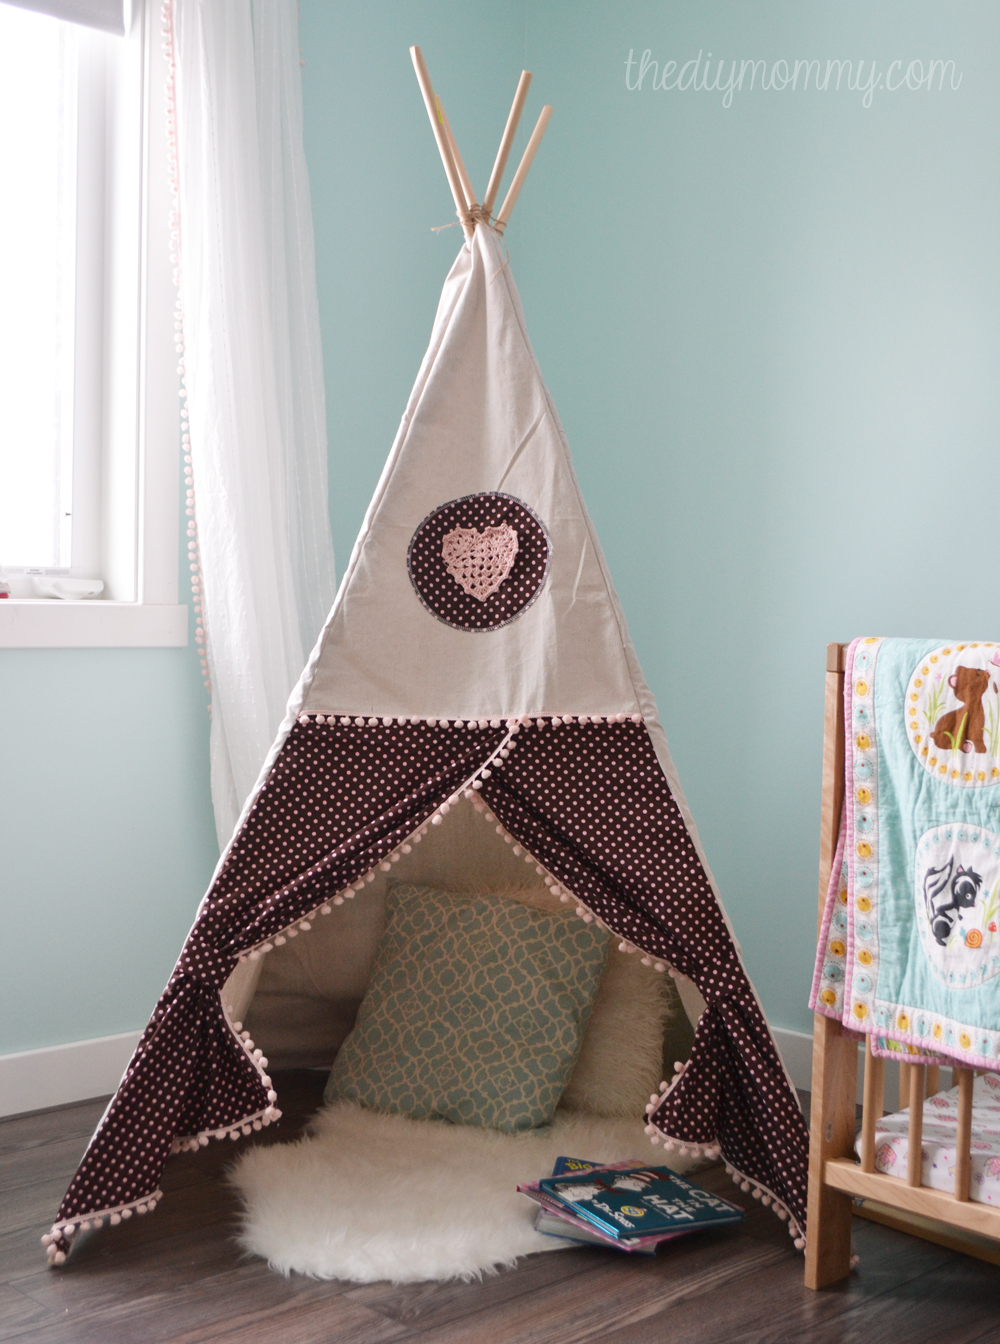 DIY teepee play tent in a toddler's room.